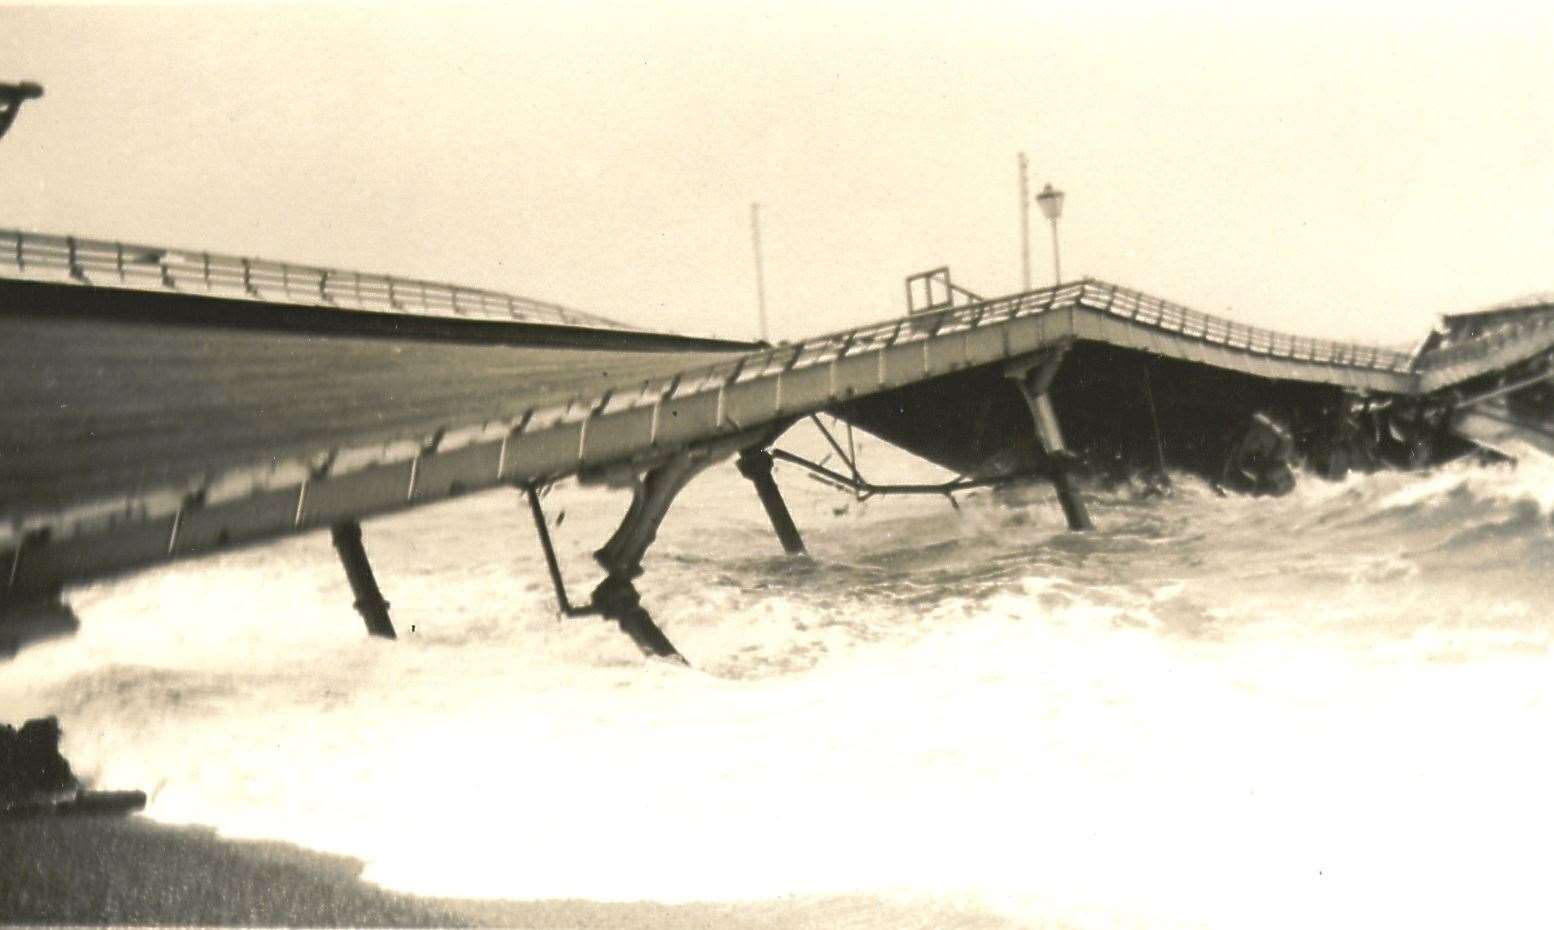 Deal Pier starts to collapse